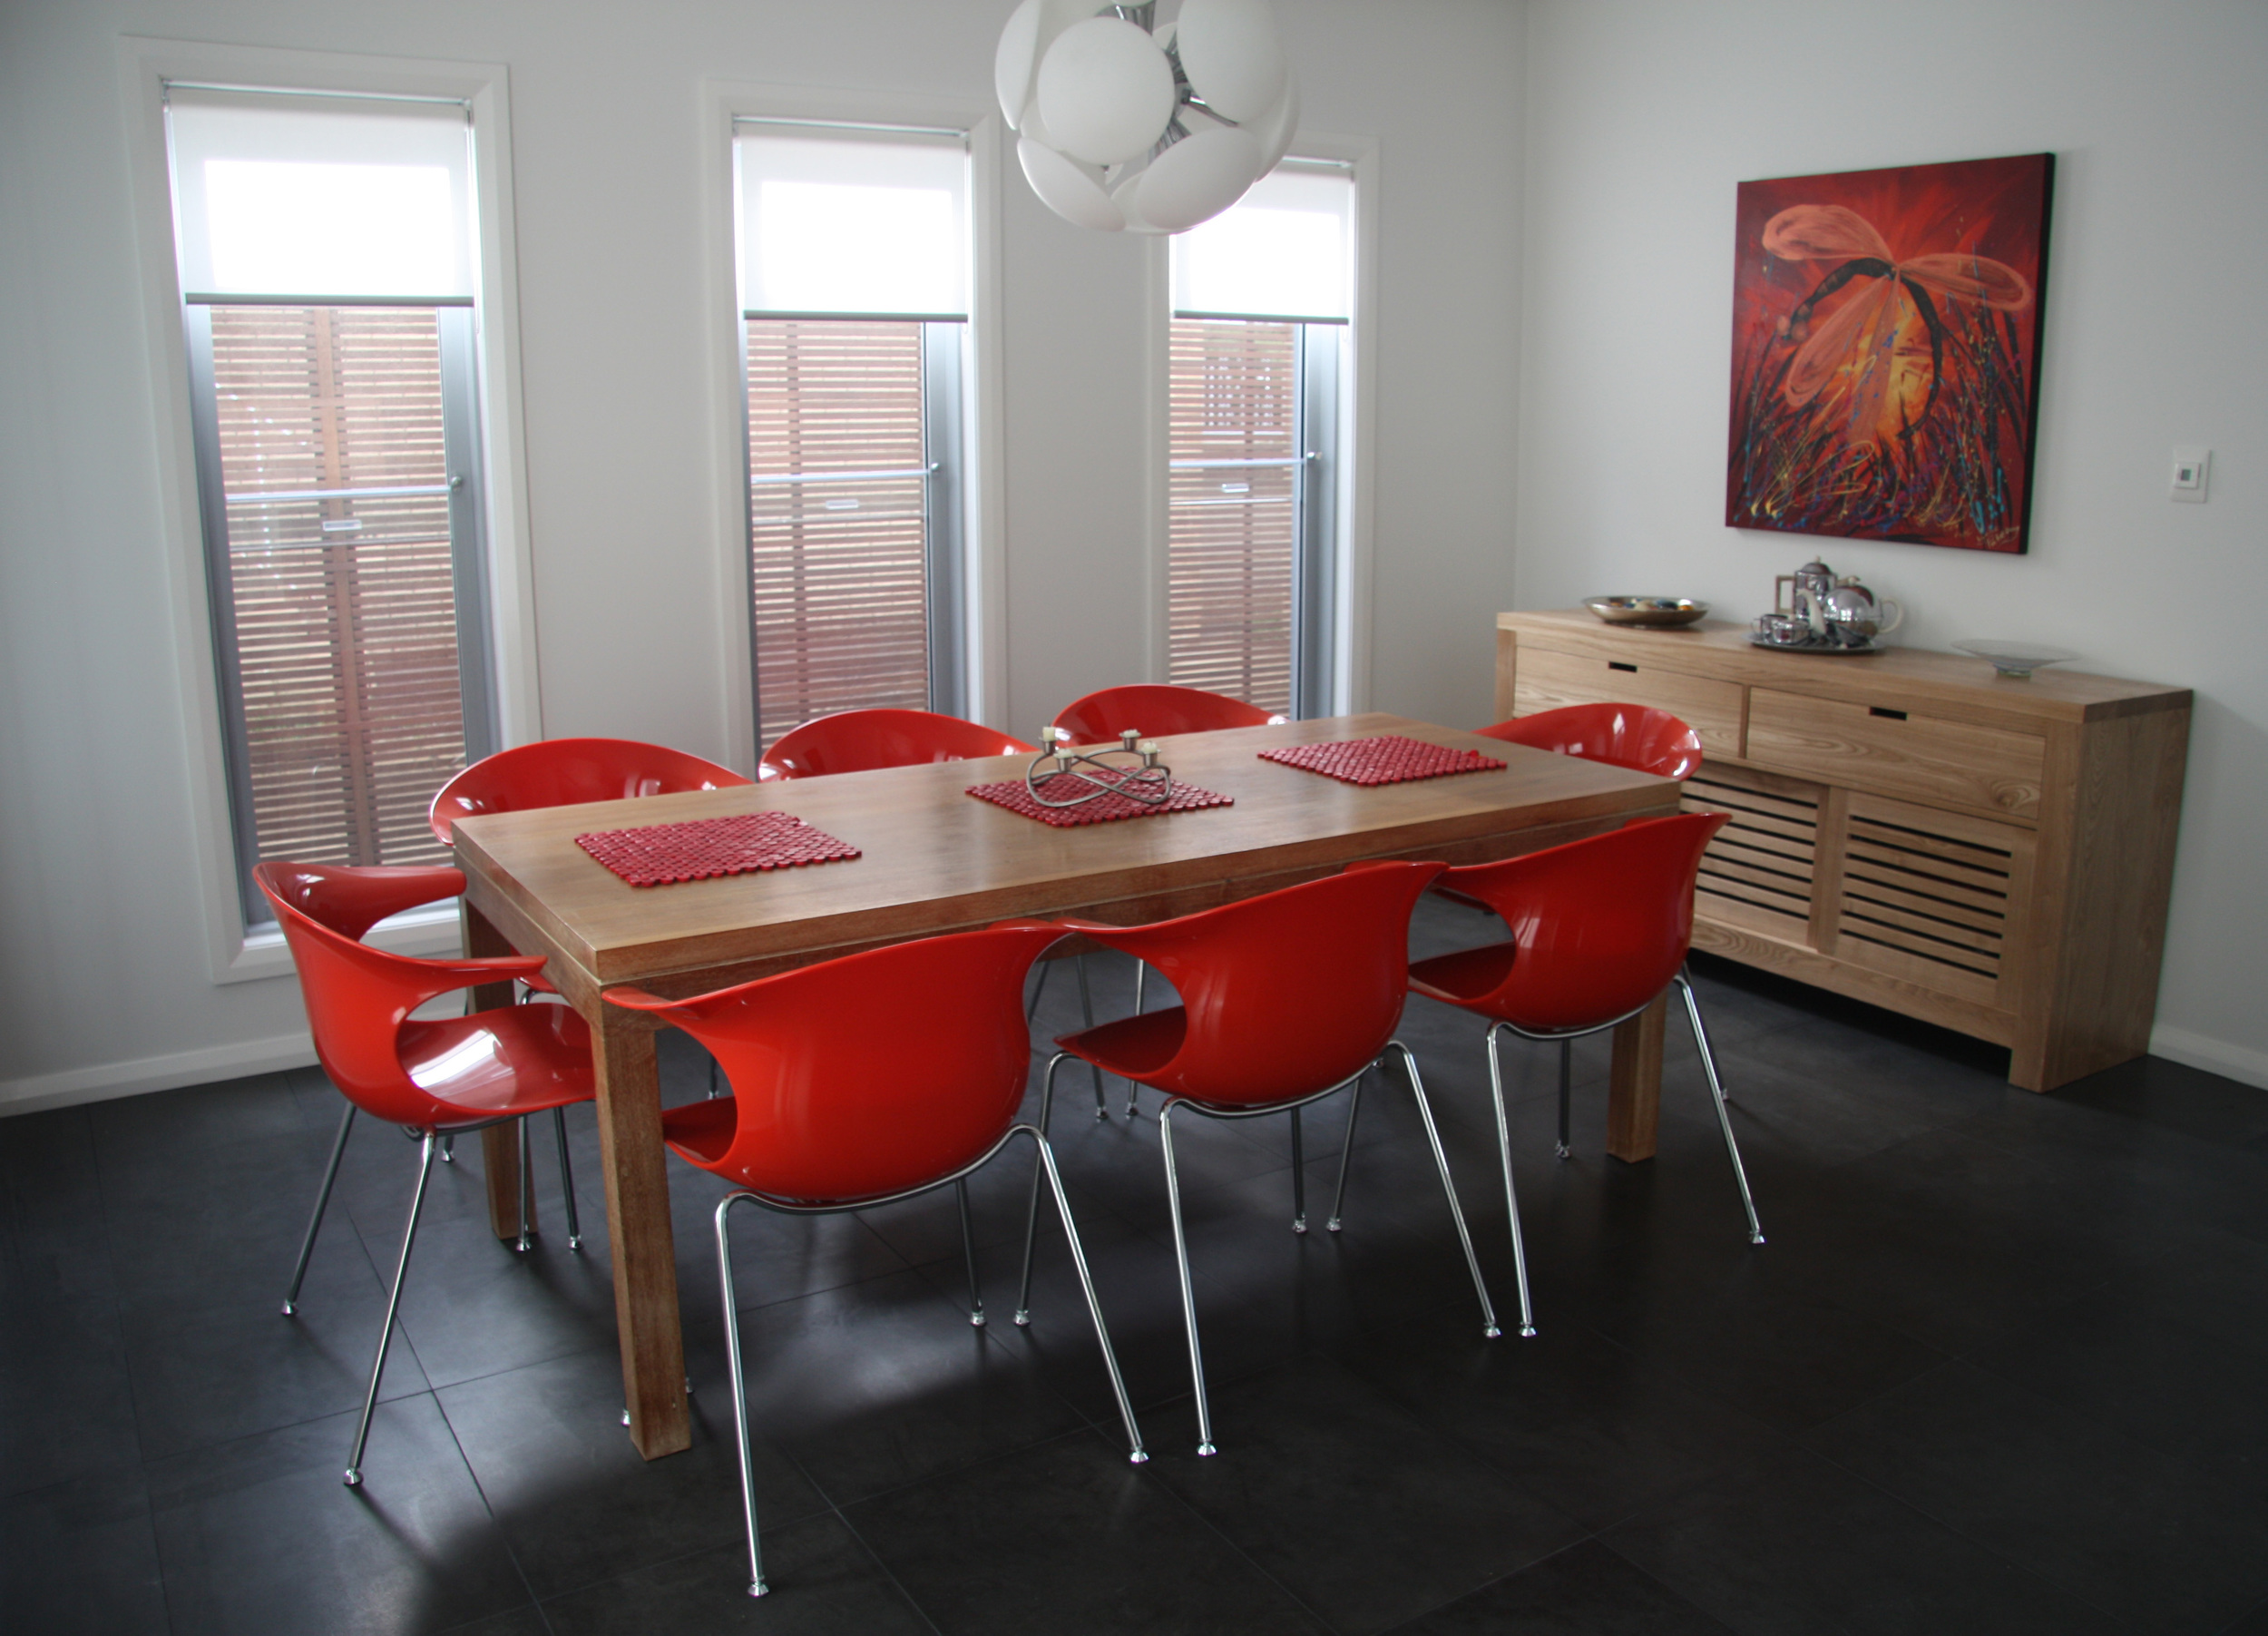  This image is one taken from a beautifully designed home with bluestone throughout - dining room, kitchen, living room and hallway.&nbsp;The result is stunning bright colours e.g. red being used to contrast the formality of the dark grey bluestone. 